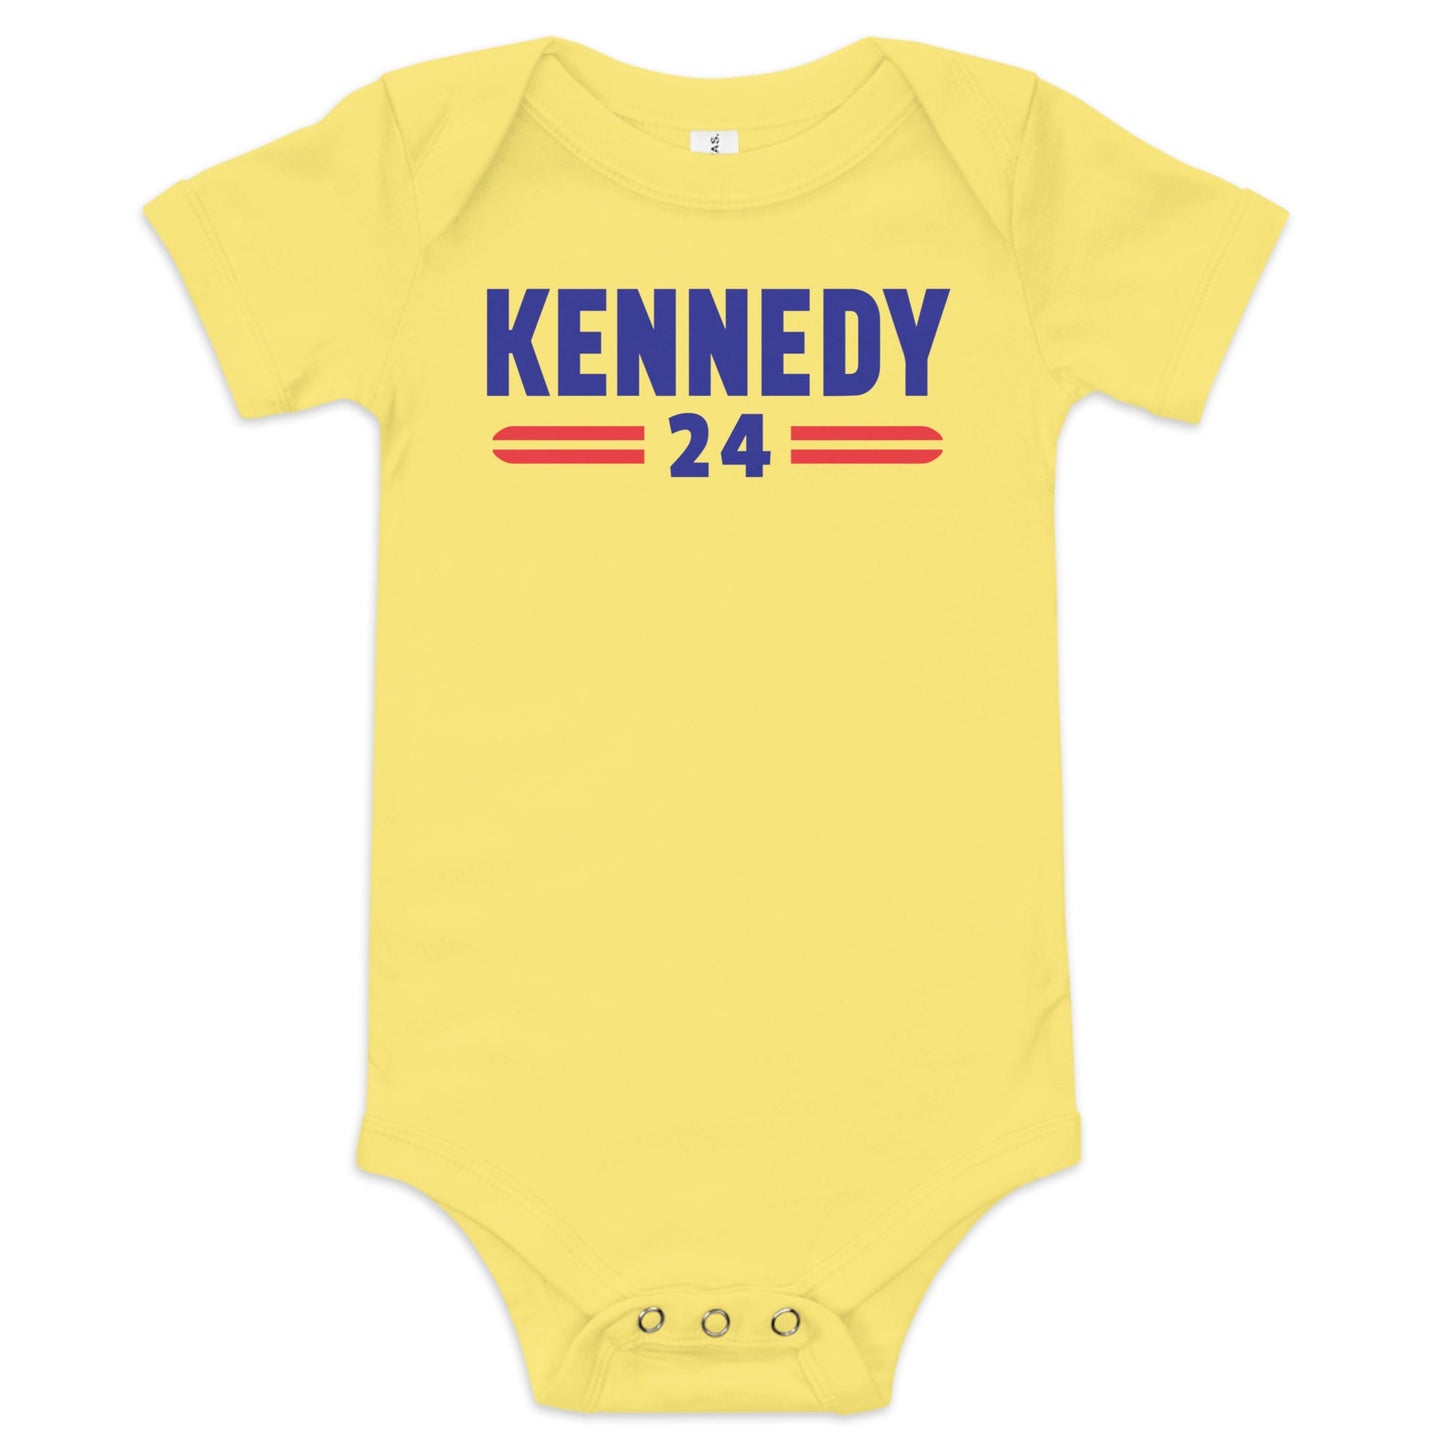 Kennedy Classic Baby Onesie - TEAM KENNEDY. All rights reserved